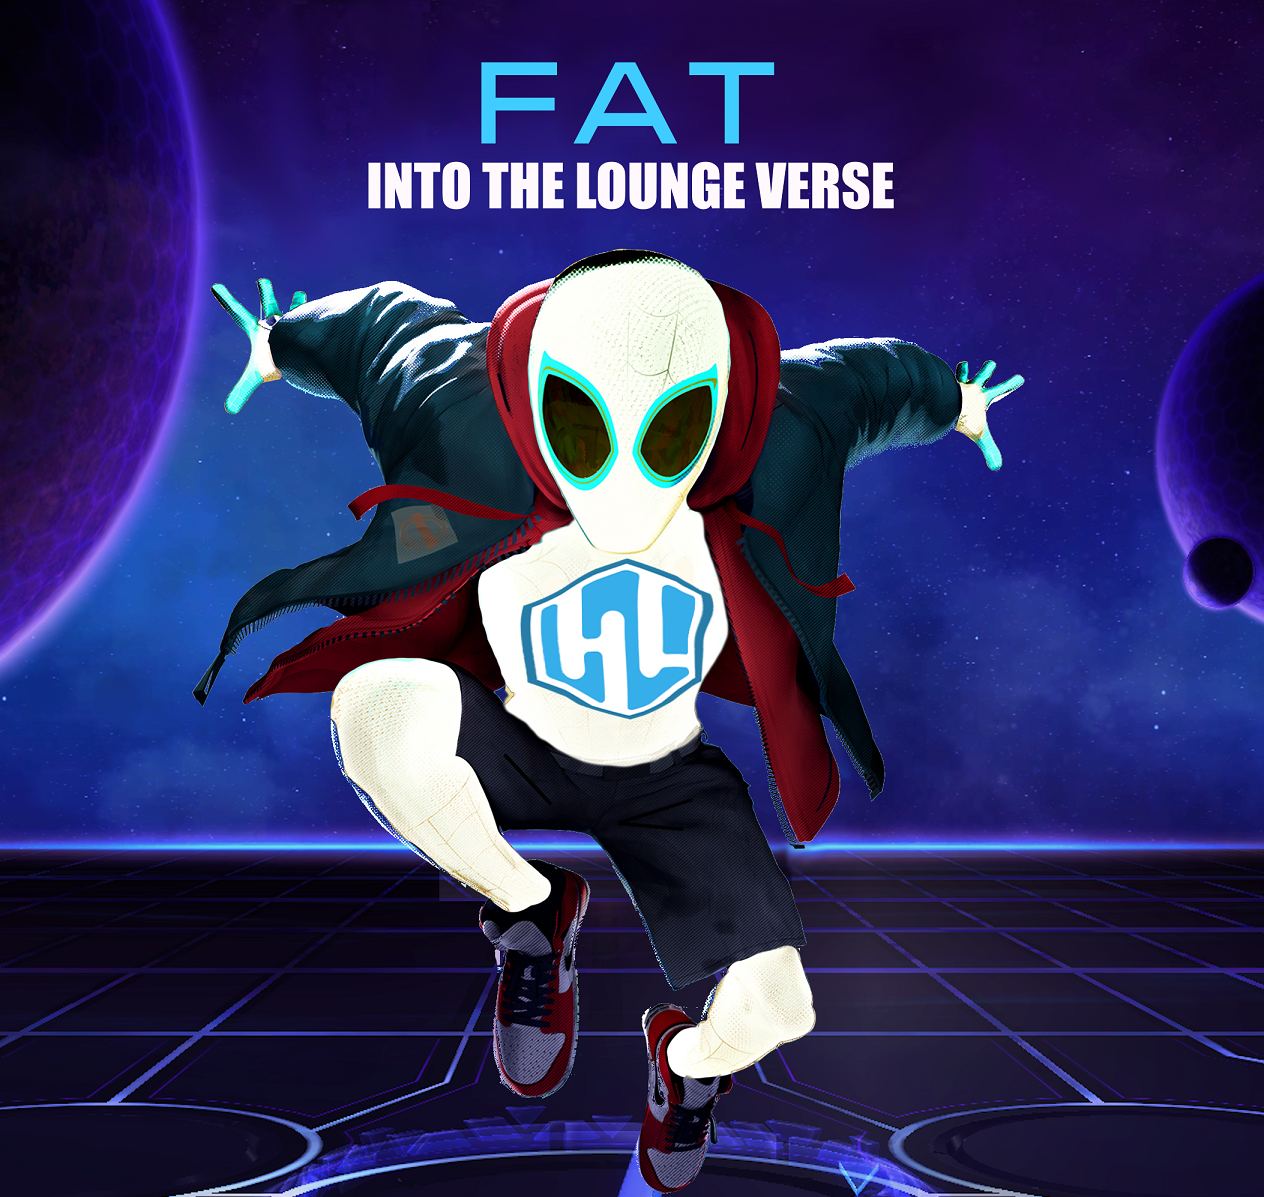 FAT Into the Lounge verse